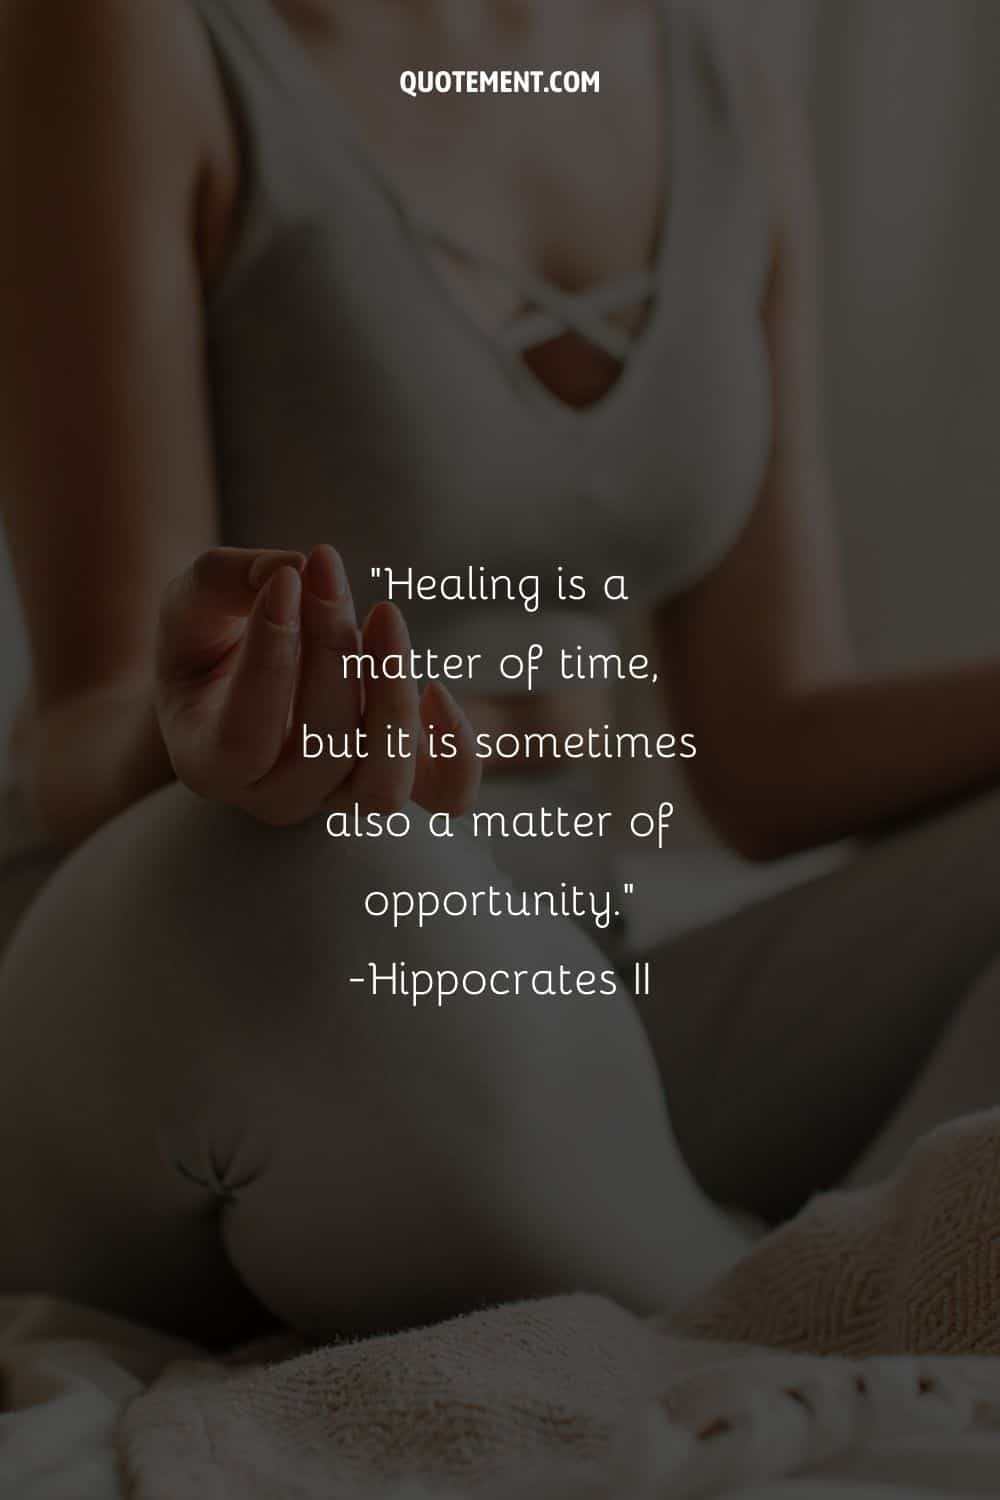 Healing is a matter of time, but it is sometimes also a matter of opportunity.